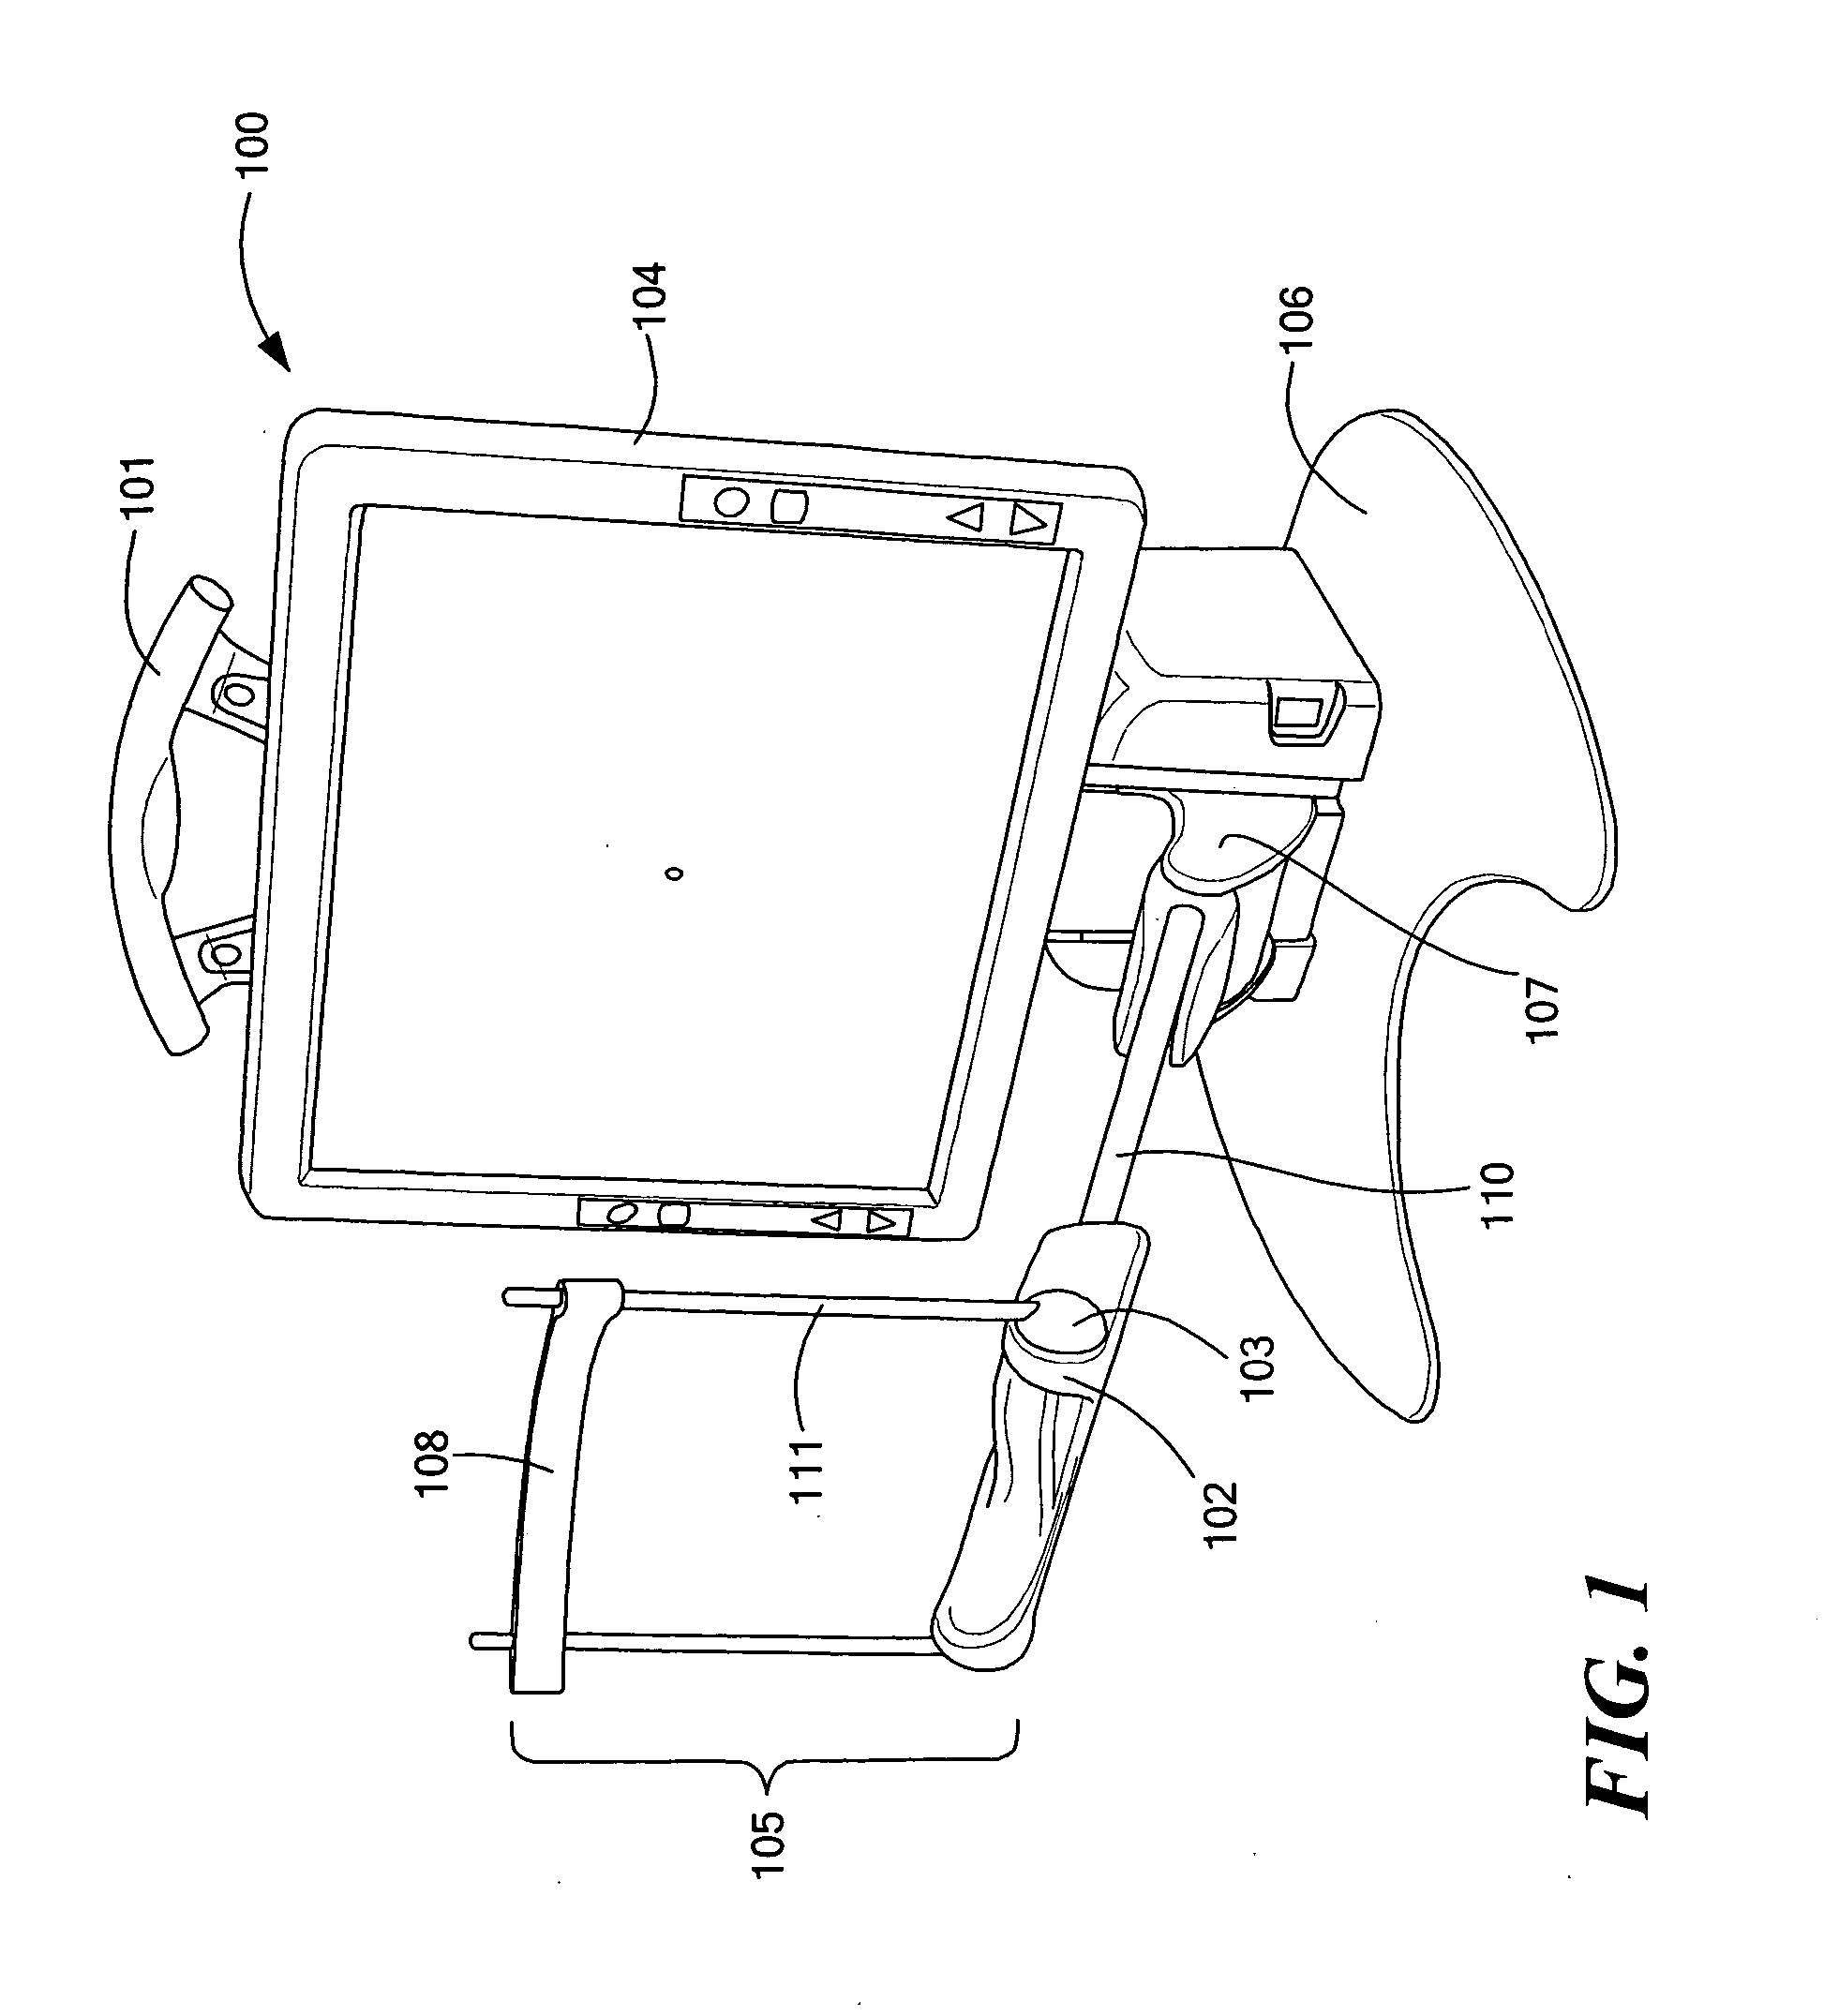 Adjustable device for vision testing and therapy